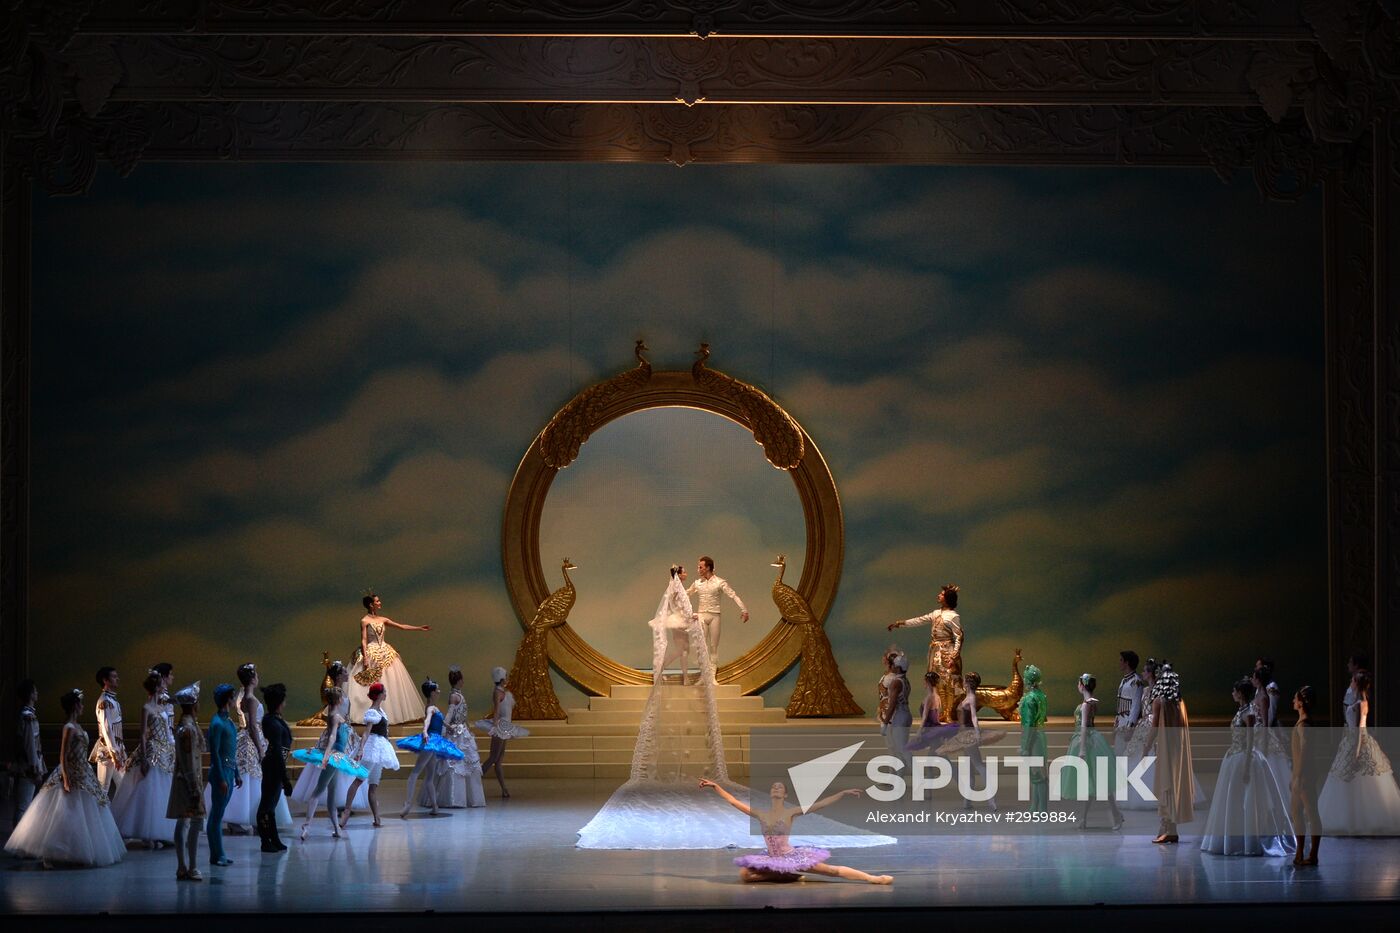 Sleeping Beauty ballet performed at Novosibirsk Opera and Ballet Theater